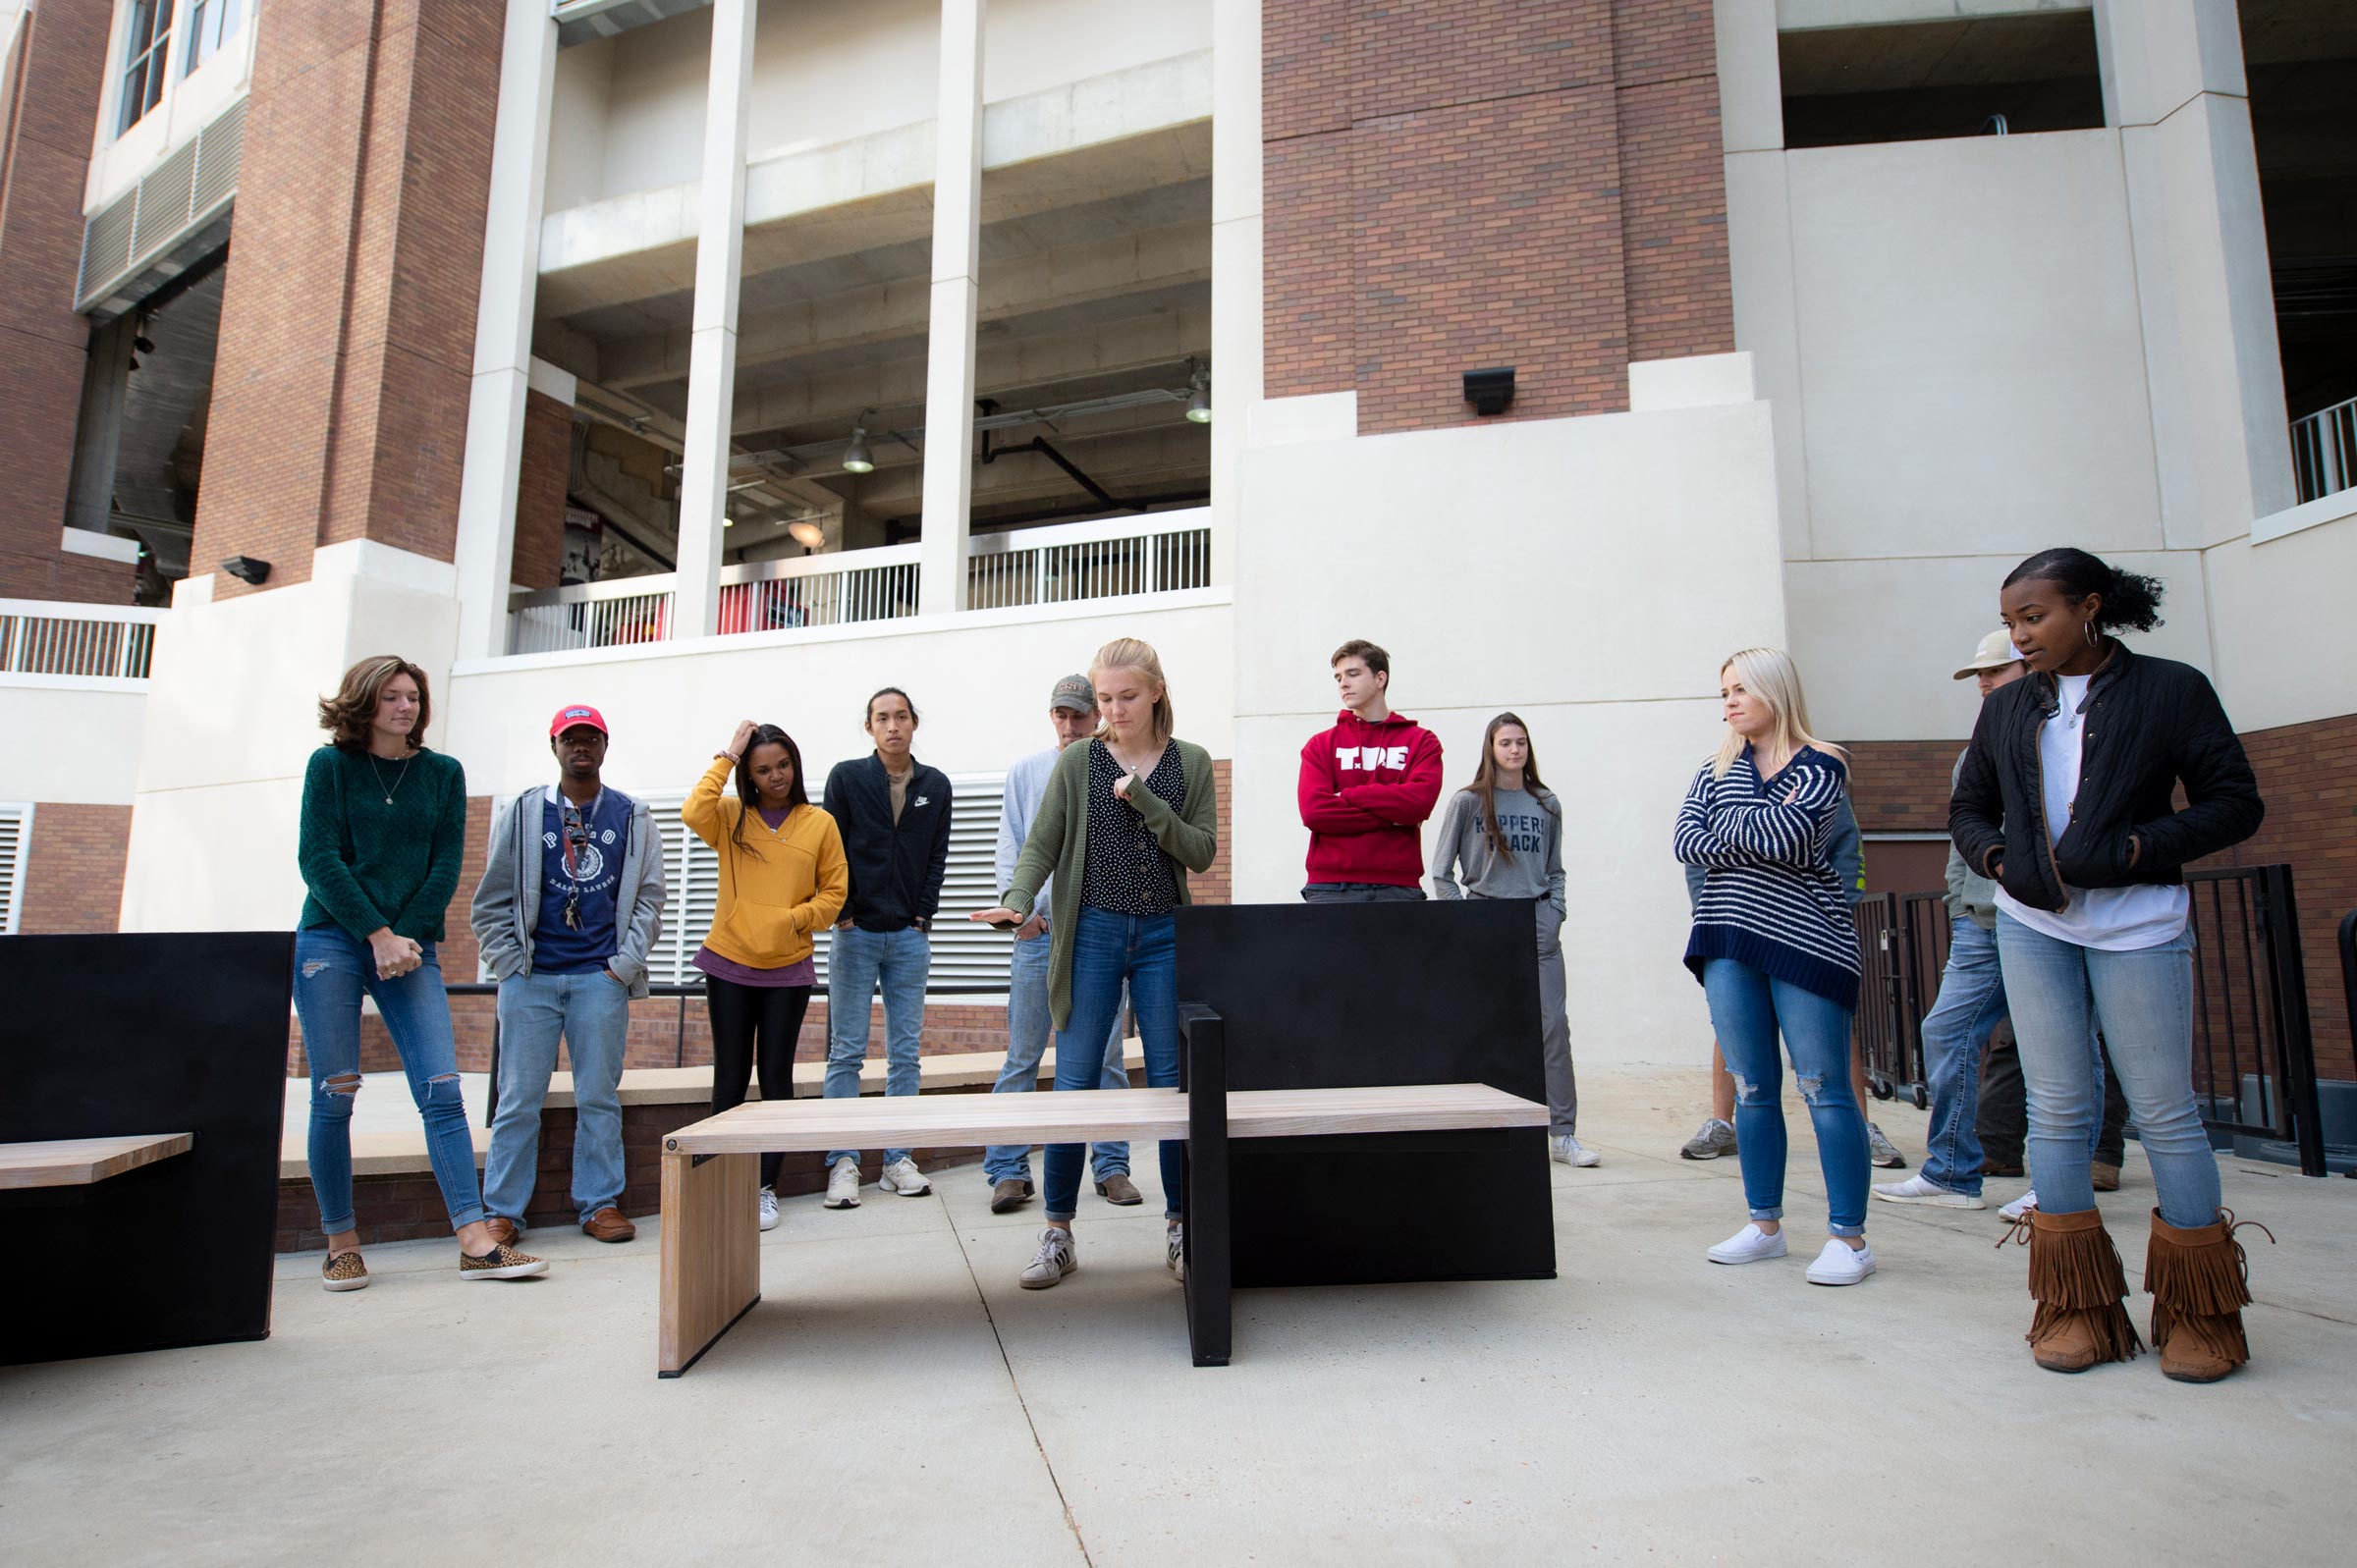 Ruthie Southall, a member of group one, explains the features of their handicap accessible bench during Architecture-Building Construction Science bench project presentations.